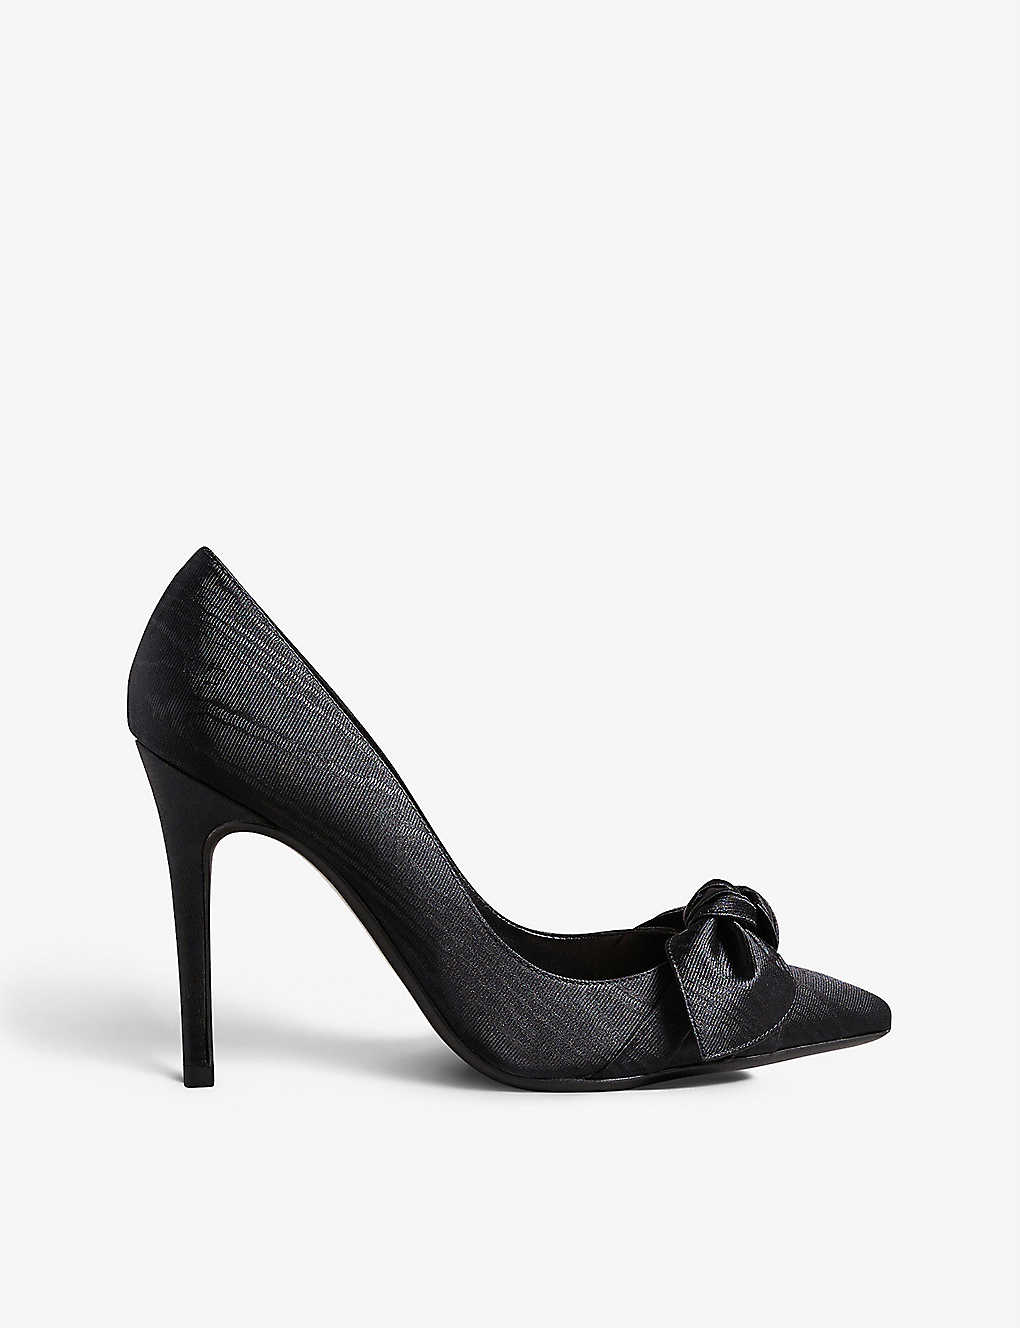 Shop Ted Baker Womens Black Hyana Bow-embellished Pointed-toe Cotton-blend Courts